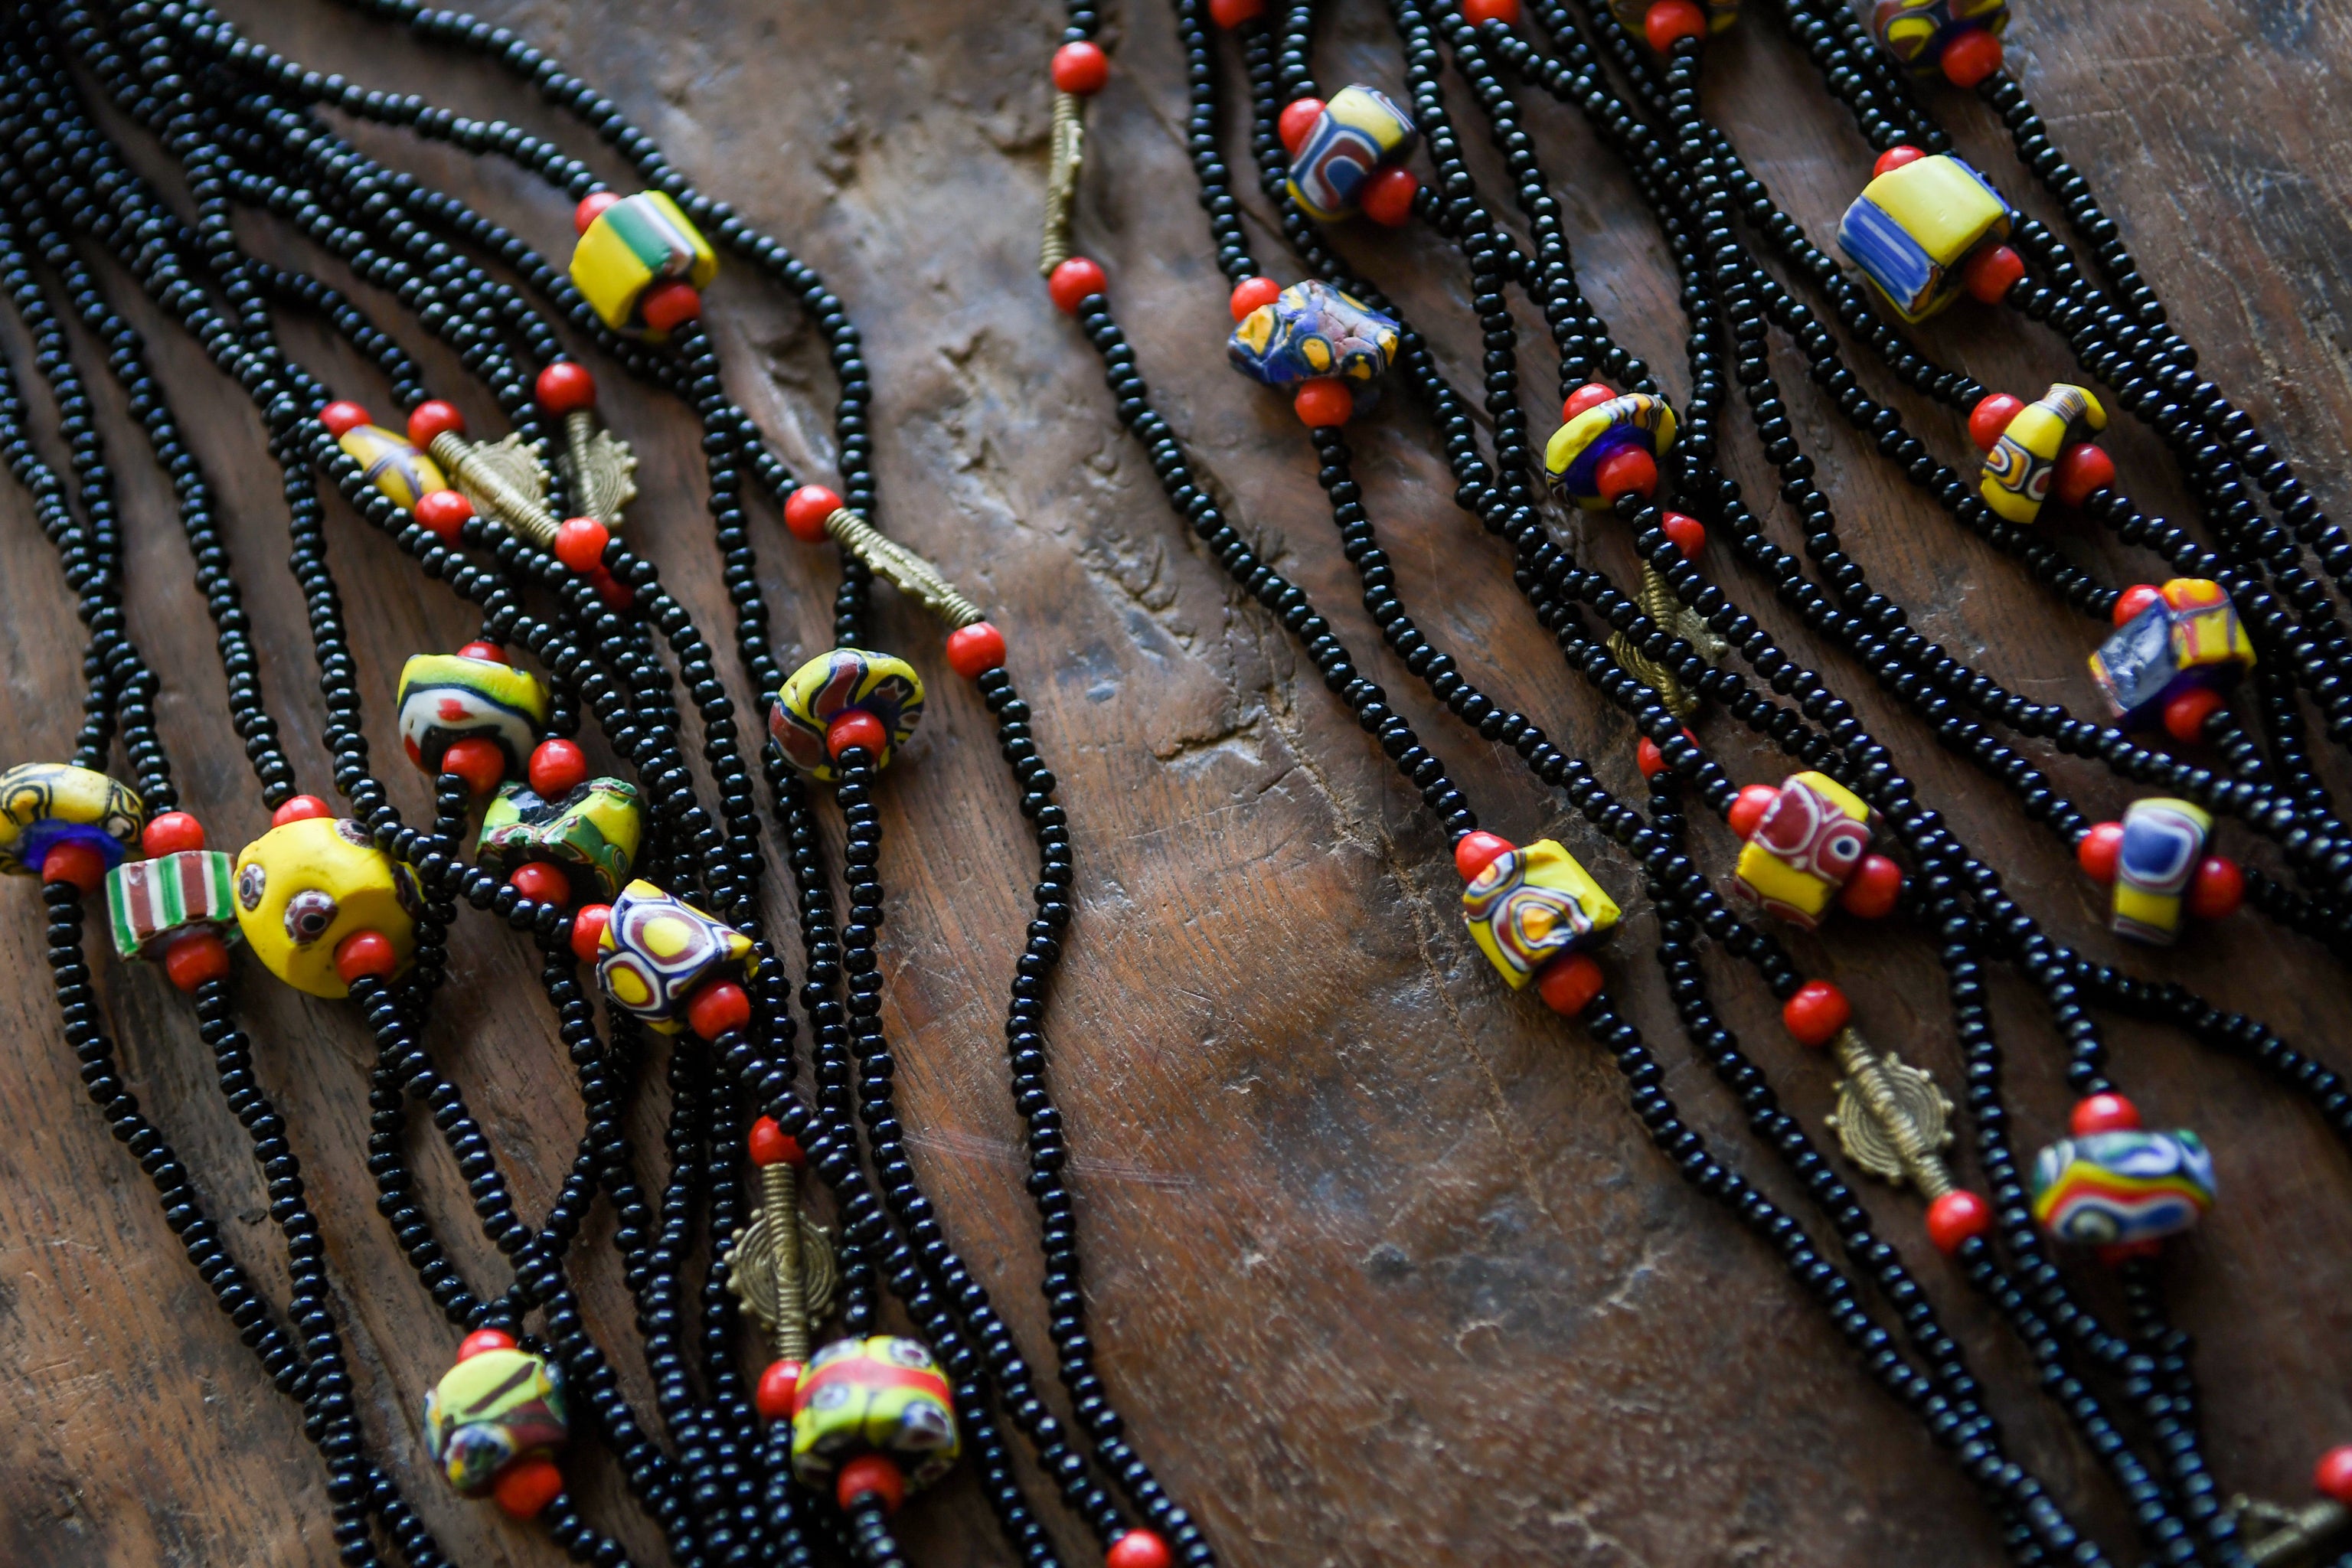 Tribal Necklaces - Traditional - Folk Art - African - Objects - Artifacts - Collectible - Tribal Beaded Necklace - Stylish Unique - Crafted - Mixed Venetian Millefiori Glass Trade Beads - Tribal Necklace - Eye - Catching Design Piece